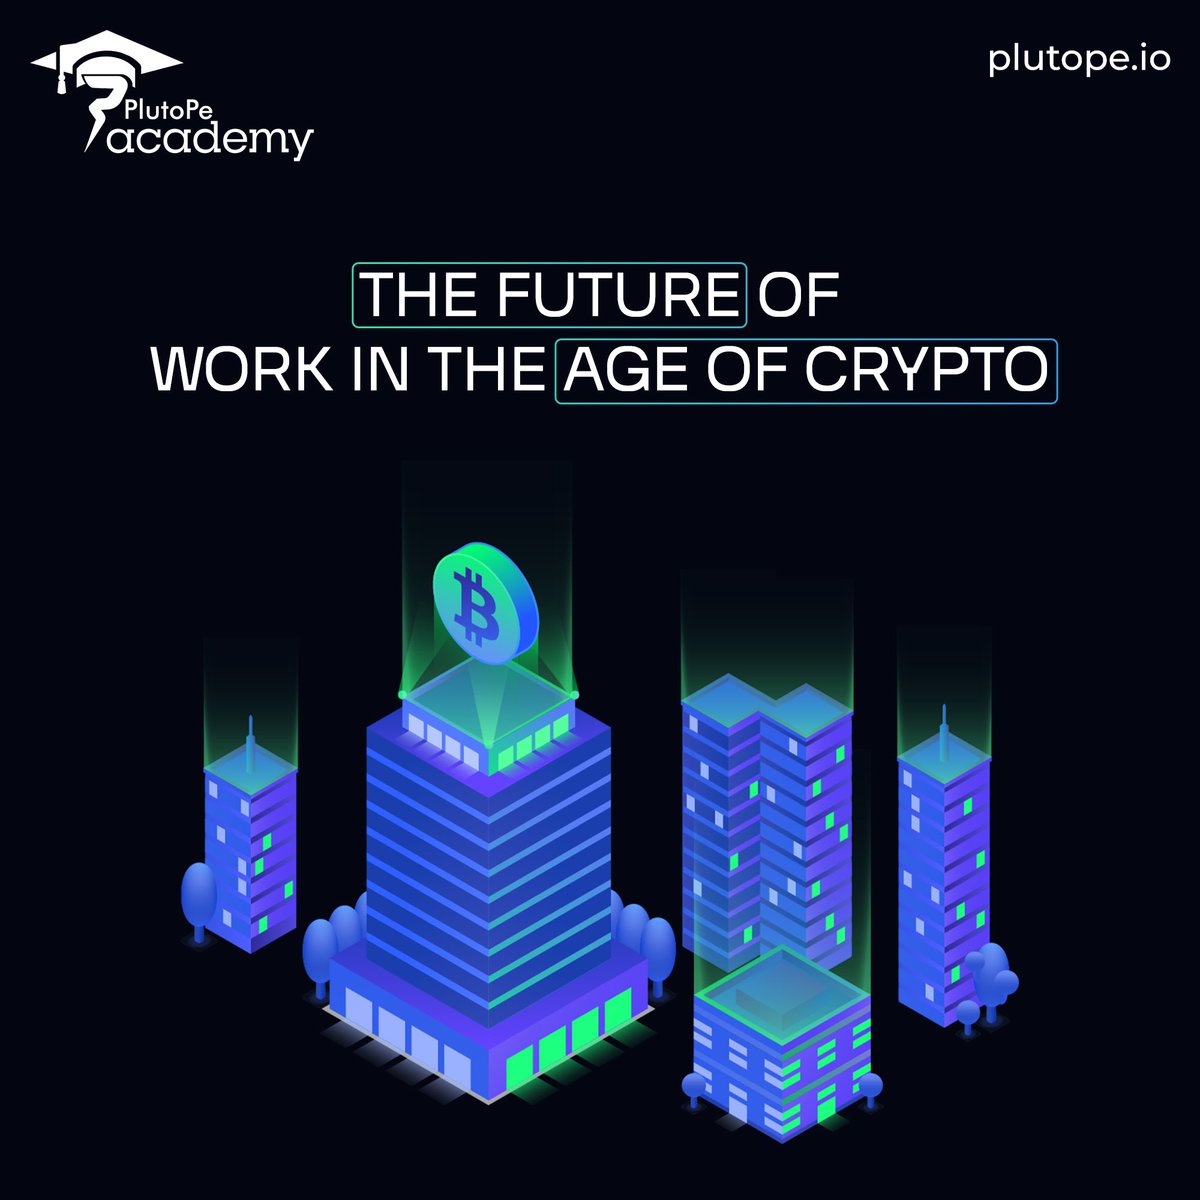 Work in the Age of 'Magic Money'?🕵️‍♂️ Remember getting a summer job? Imagine a future where 'magic internet money'(#crypto) changes how we work! That's The Future of Work in the Age of Crypto: 🤔Think of it like this: GPay & Paytm let you pay digitally. But 'magic money'might